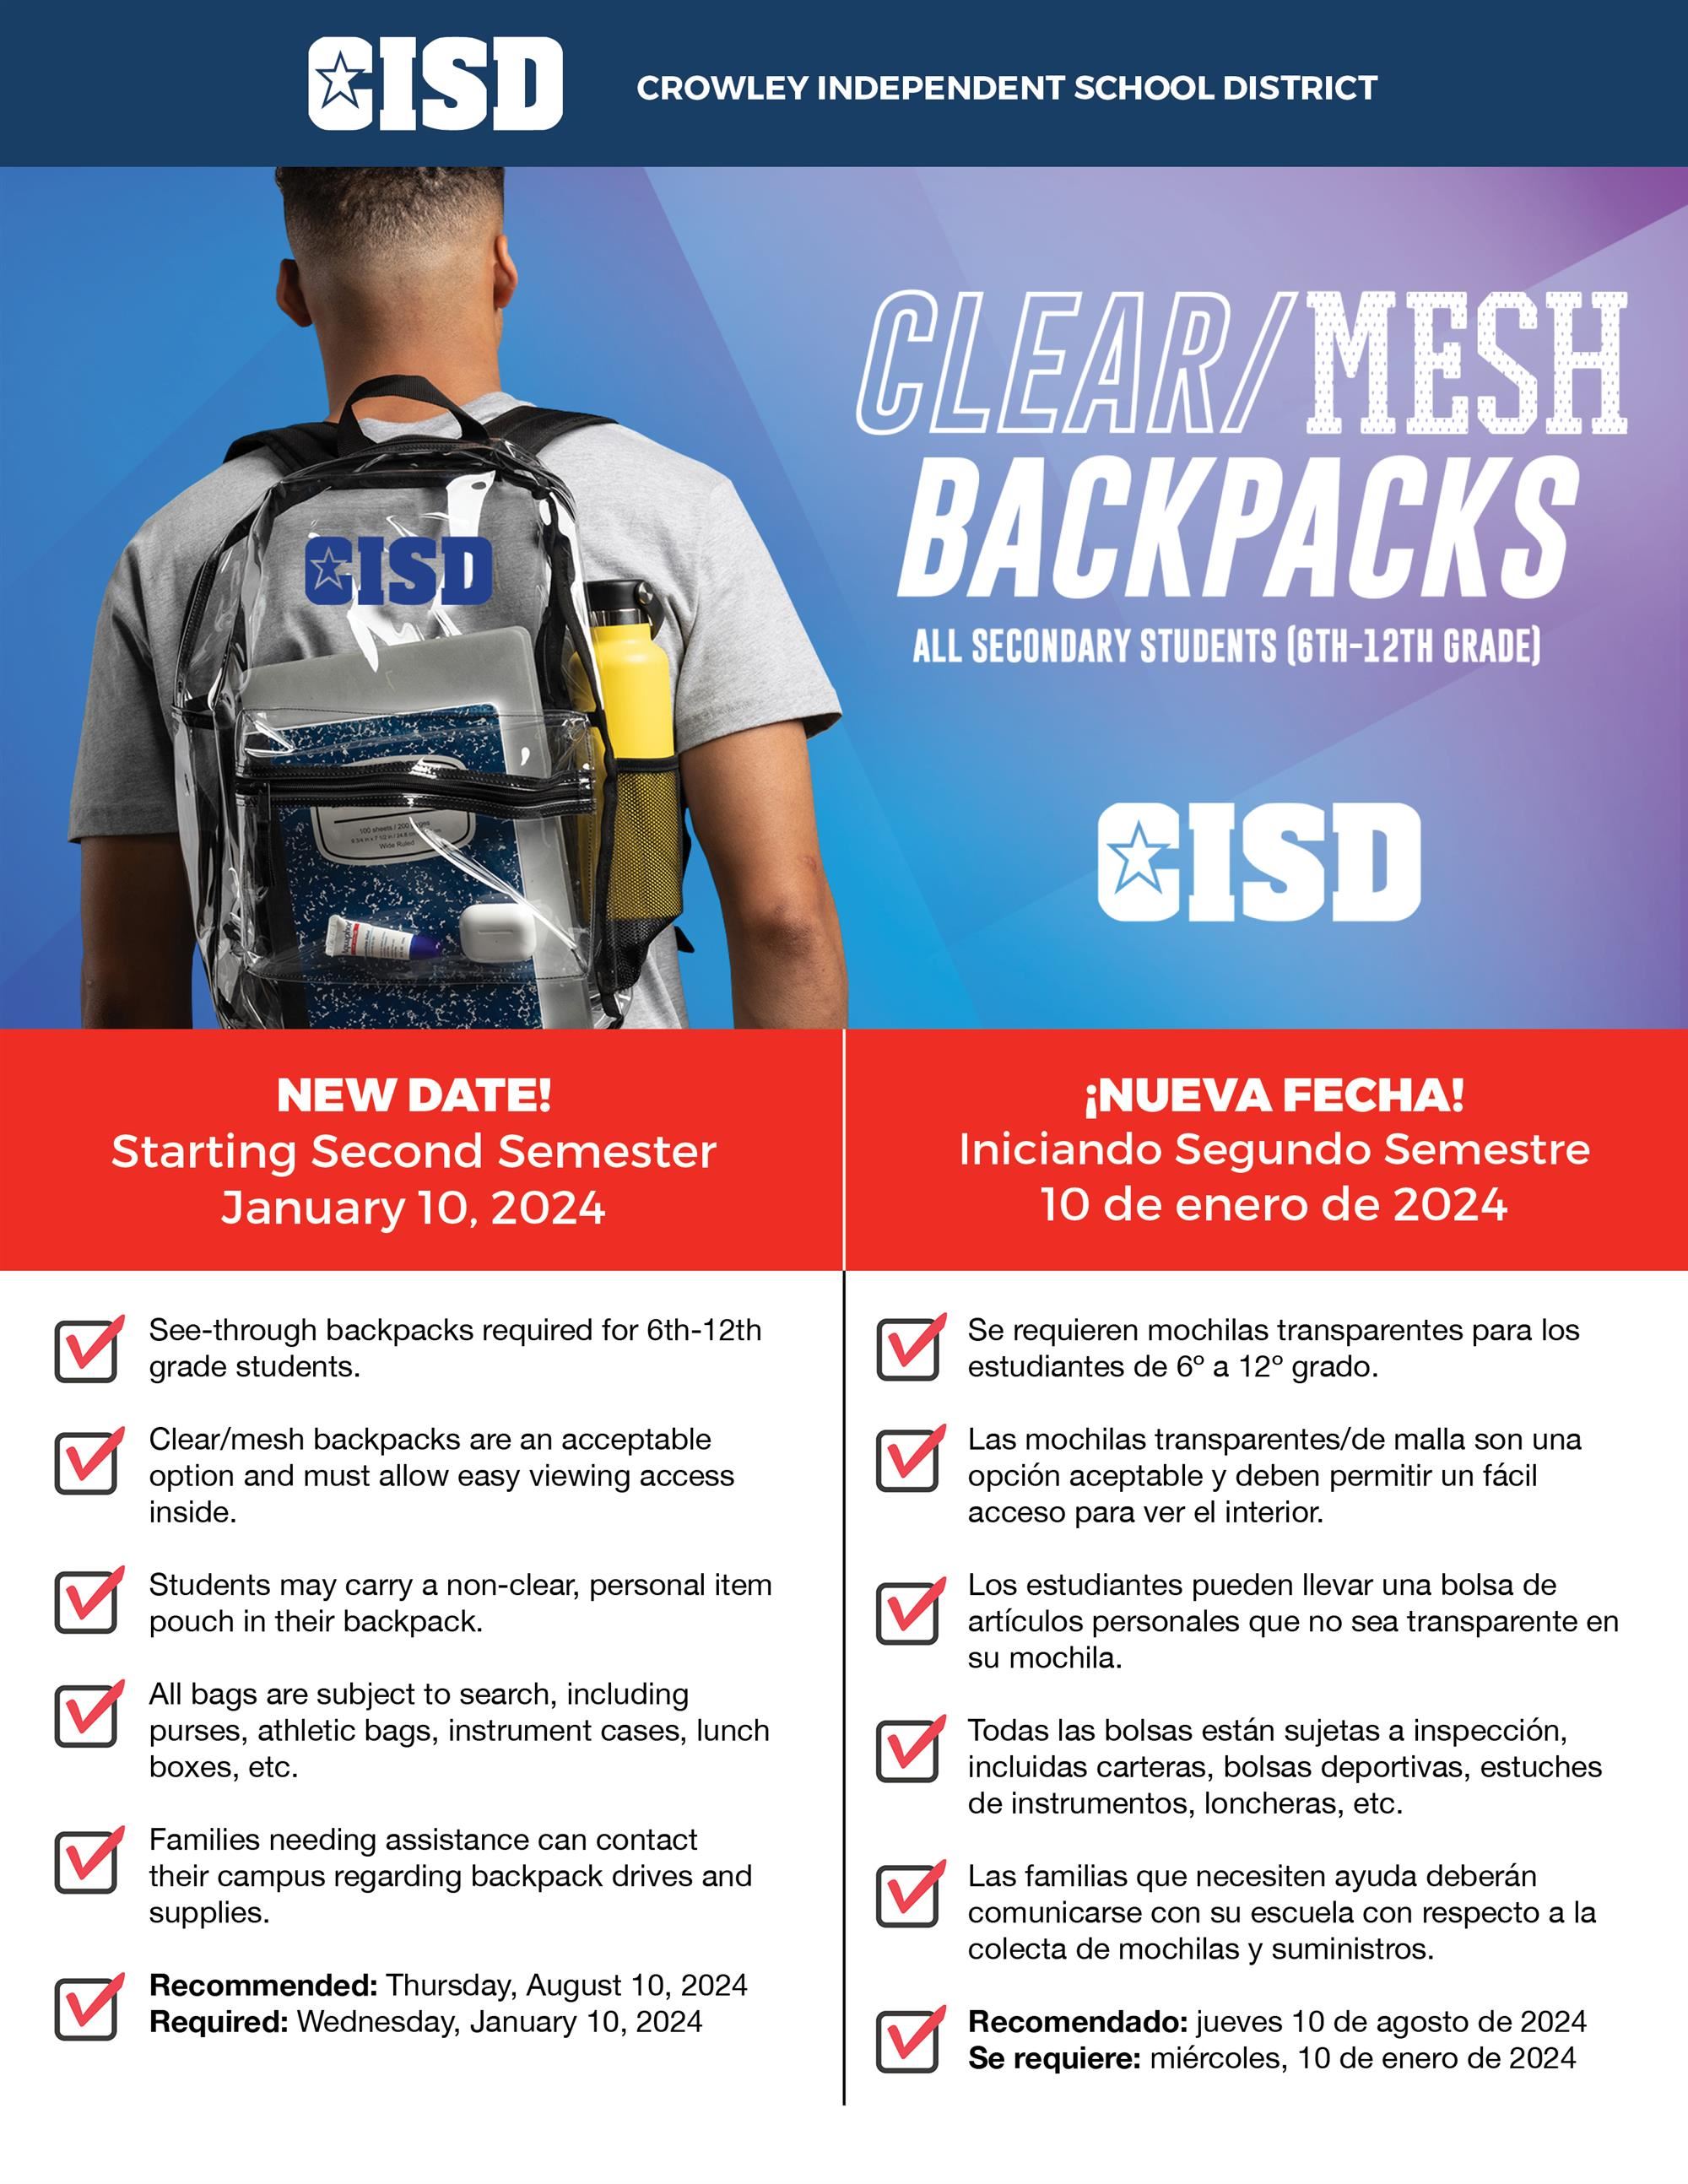 See-through backpacks required on Jan. 10, 2024